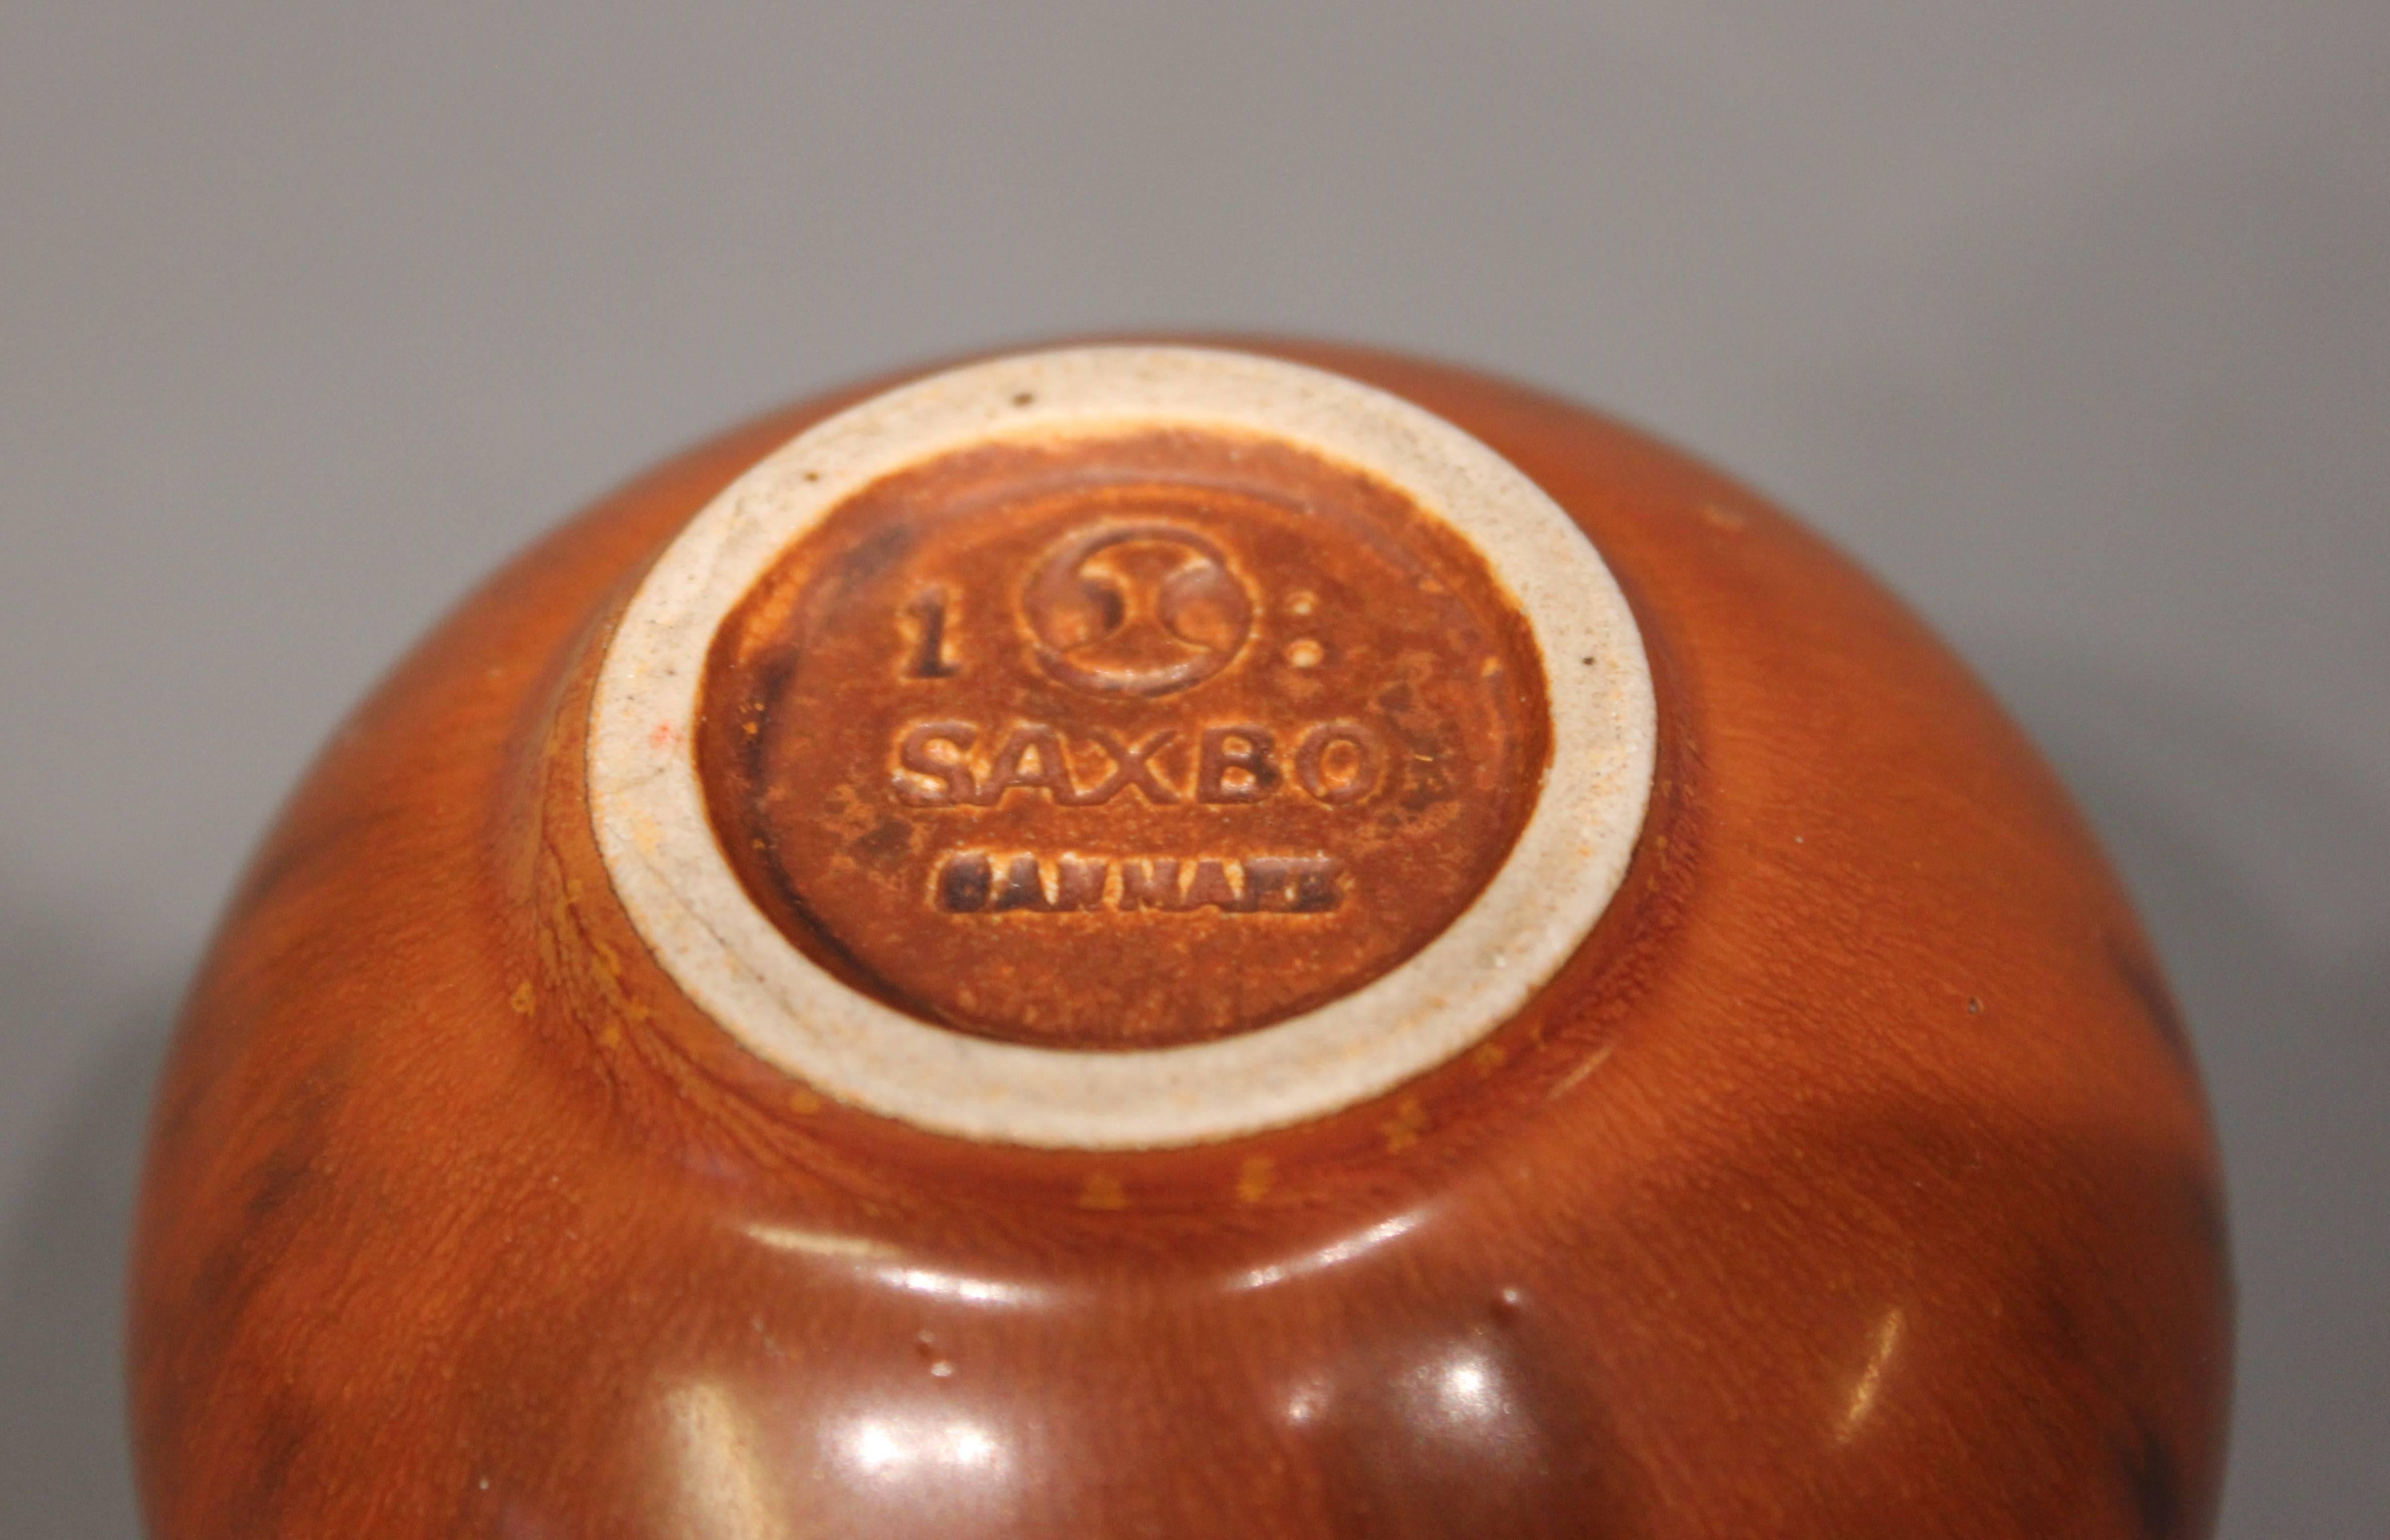 Late 20th Century Ceramic Vase with a Light Brown Glaze, No.: 1 by Saxbo